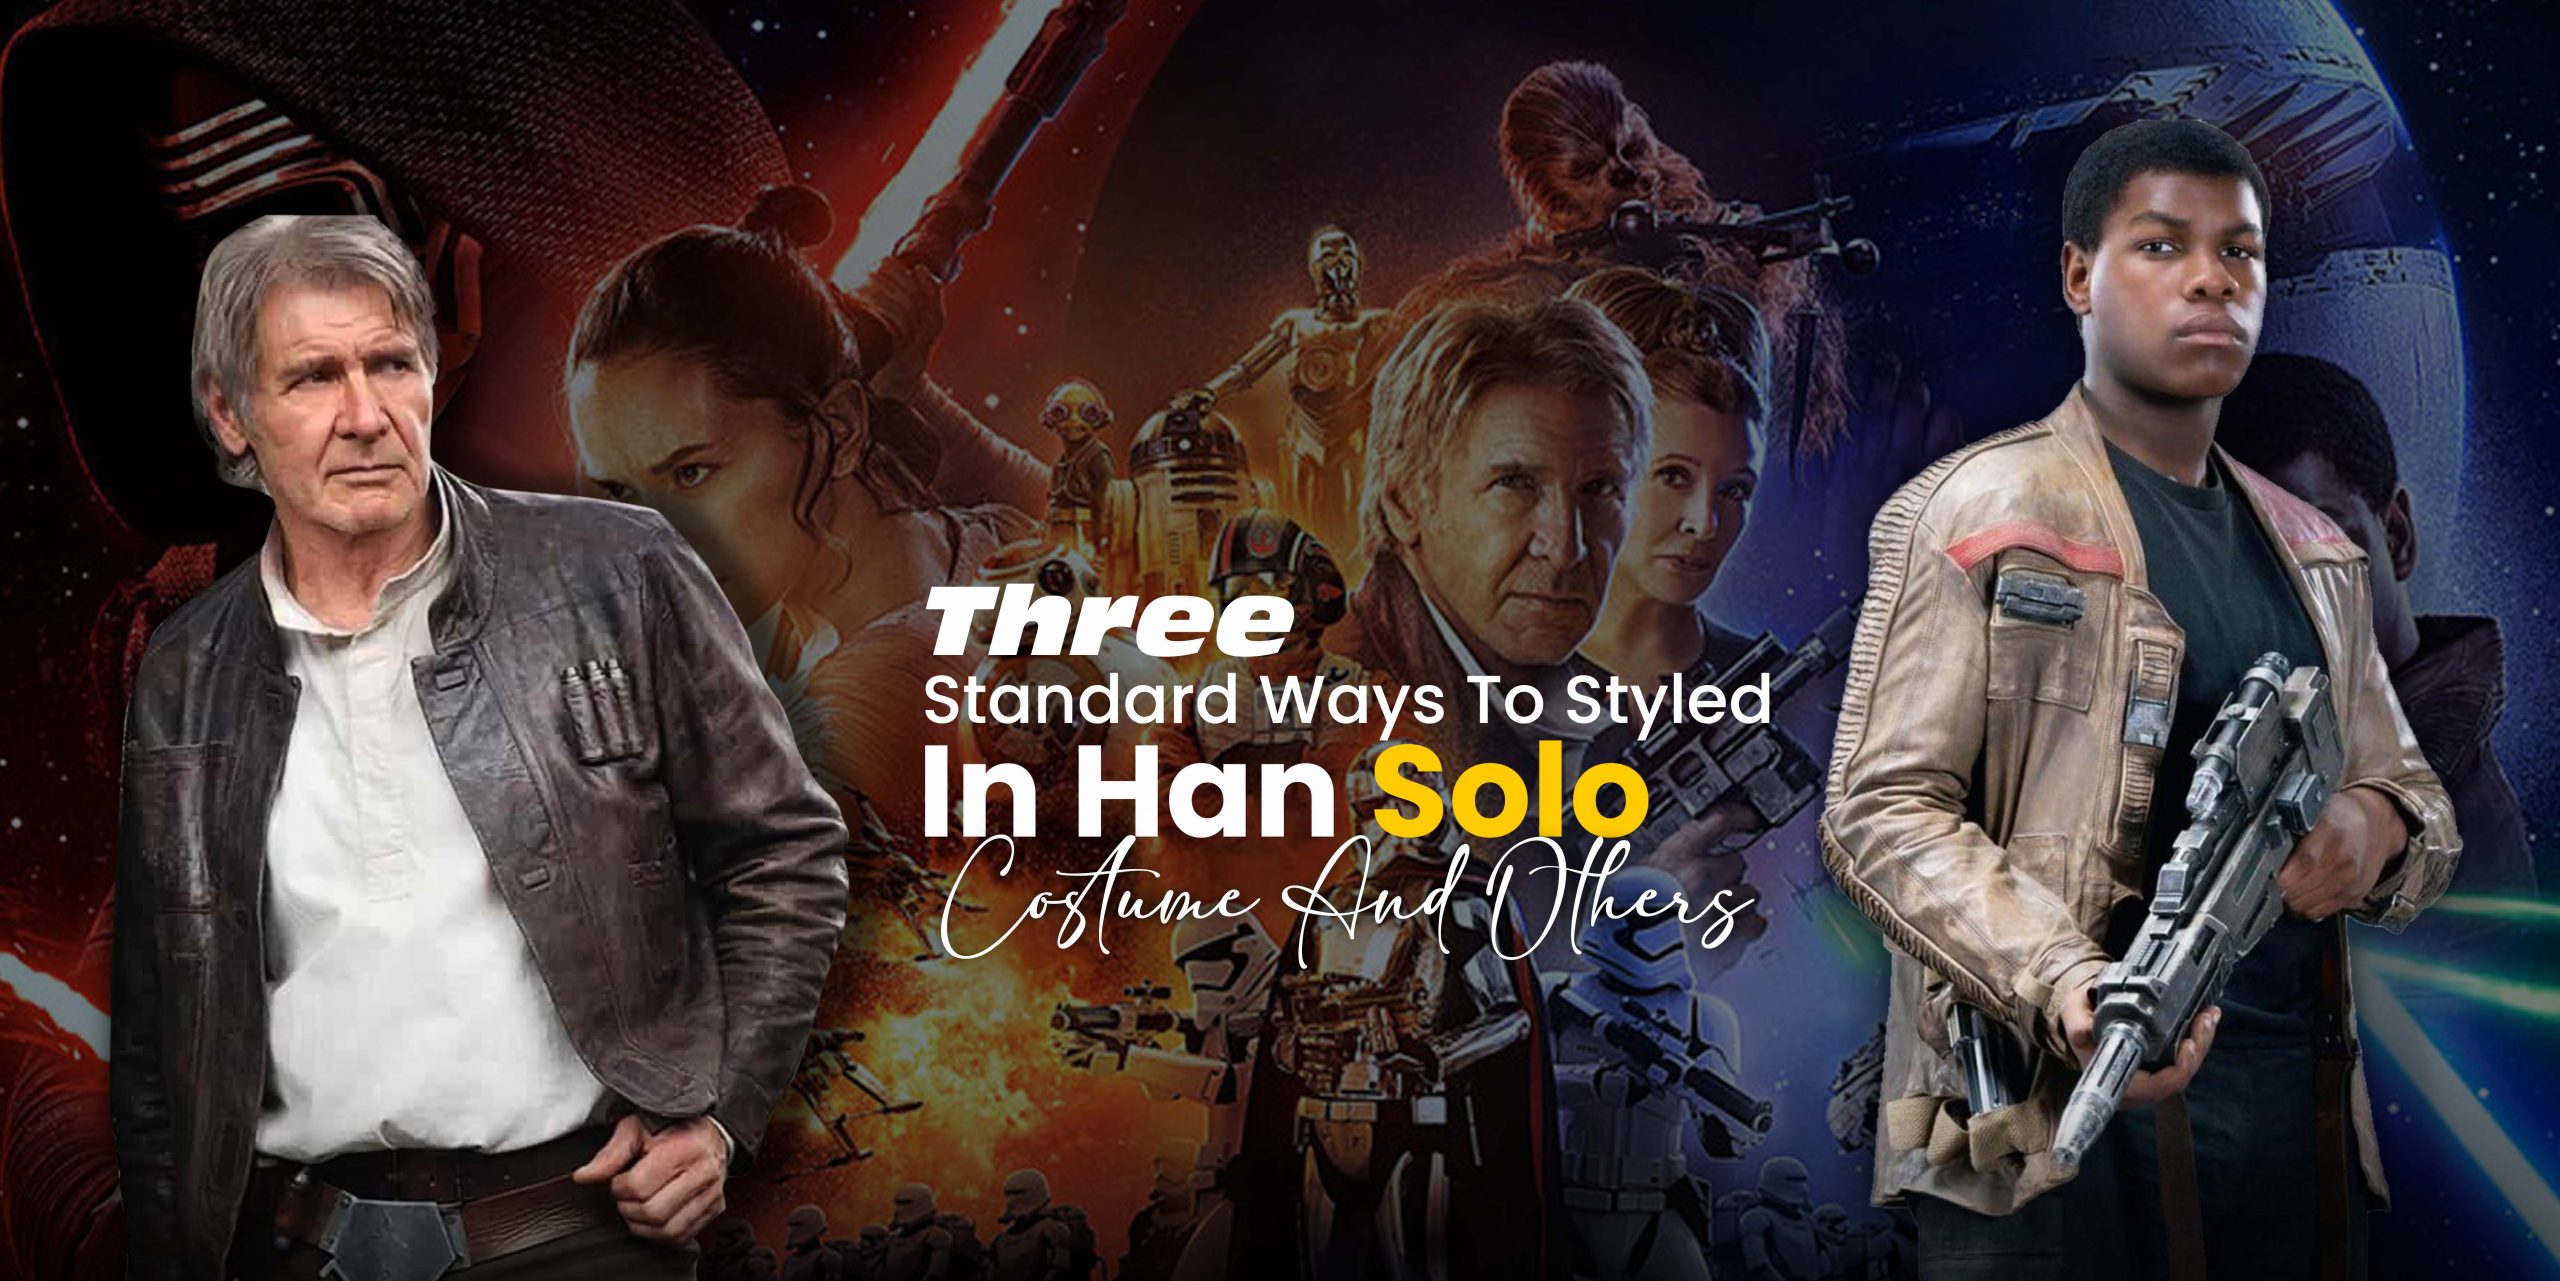 Three Standard Ways To Styled In Han Solo Costume And Others